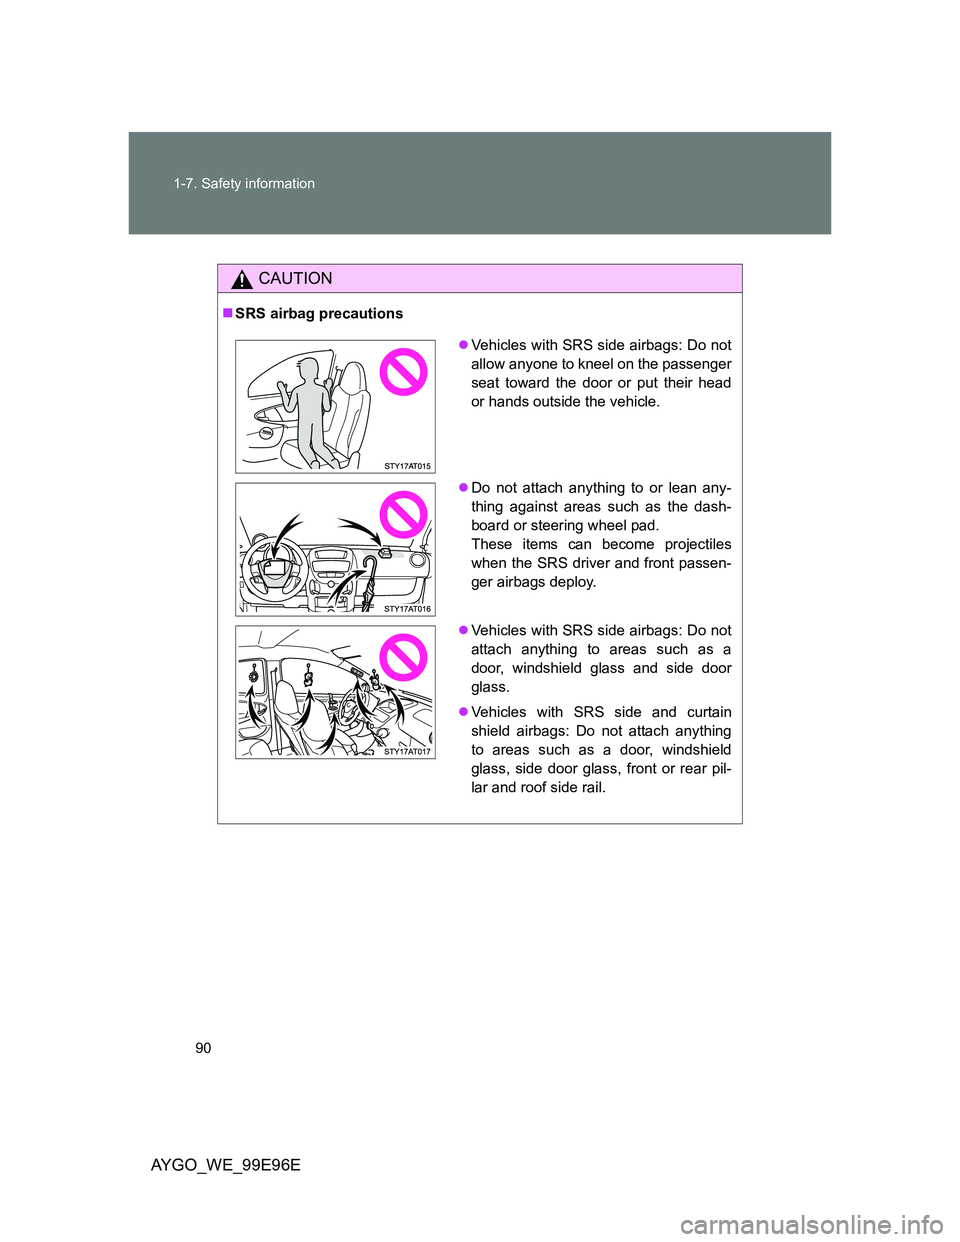 TOYOTA AYGO 2012  Owners Manual (in English) 90 1-7. Safety information
AYGO_WE_99E96E
CAUTION
SRS airbag precautions
Vehicles with SRS side airbags: Do not
allow anyone to kneel on the passenger
seat toward the door or put their head
or h